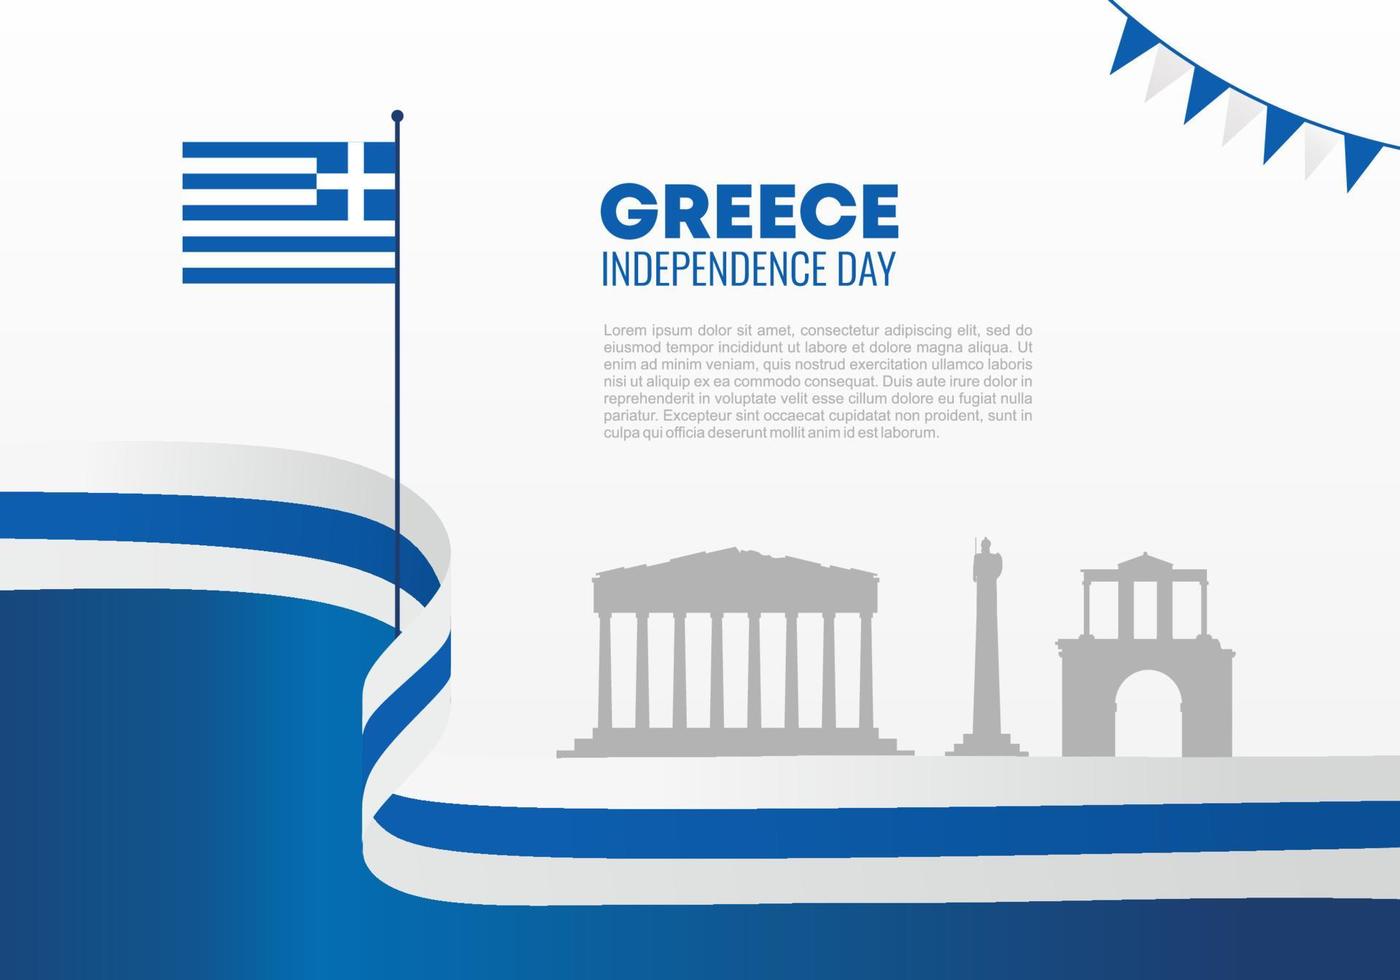 Greece independence day background national celebration on March 25. vector